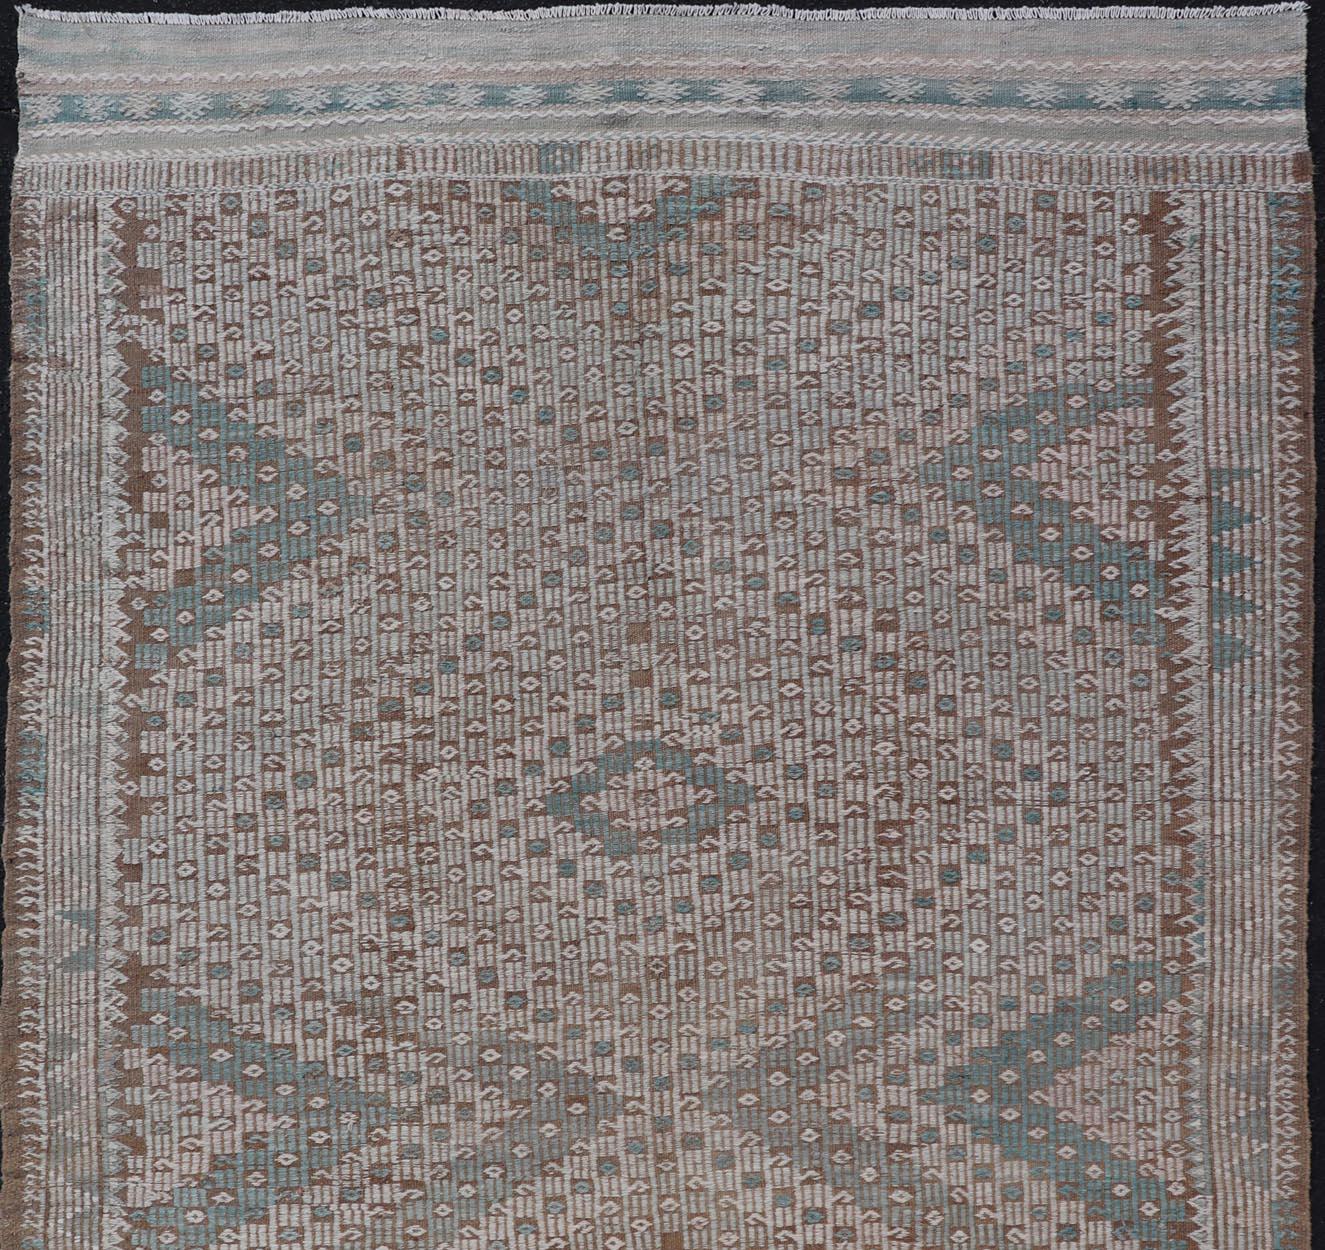 Vintage Turkish embroidered flat-weave rug with neutral-toned geometric design.
Keivan Woven Arts- Geometric design vintage Kilim rug from Turkey in pale green, cream, neutral, muted tones, rug EN-13466, country of origin / type: Turkey / Kilim,